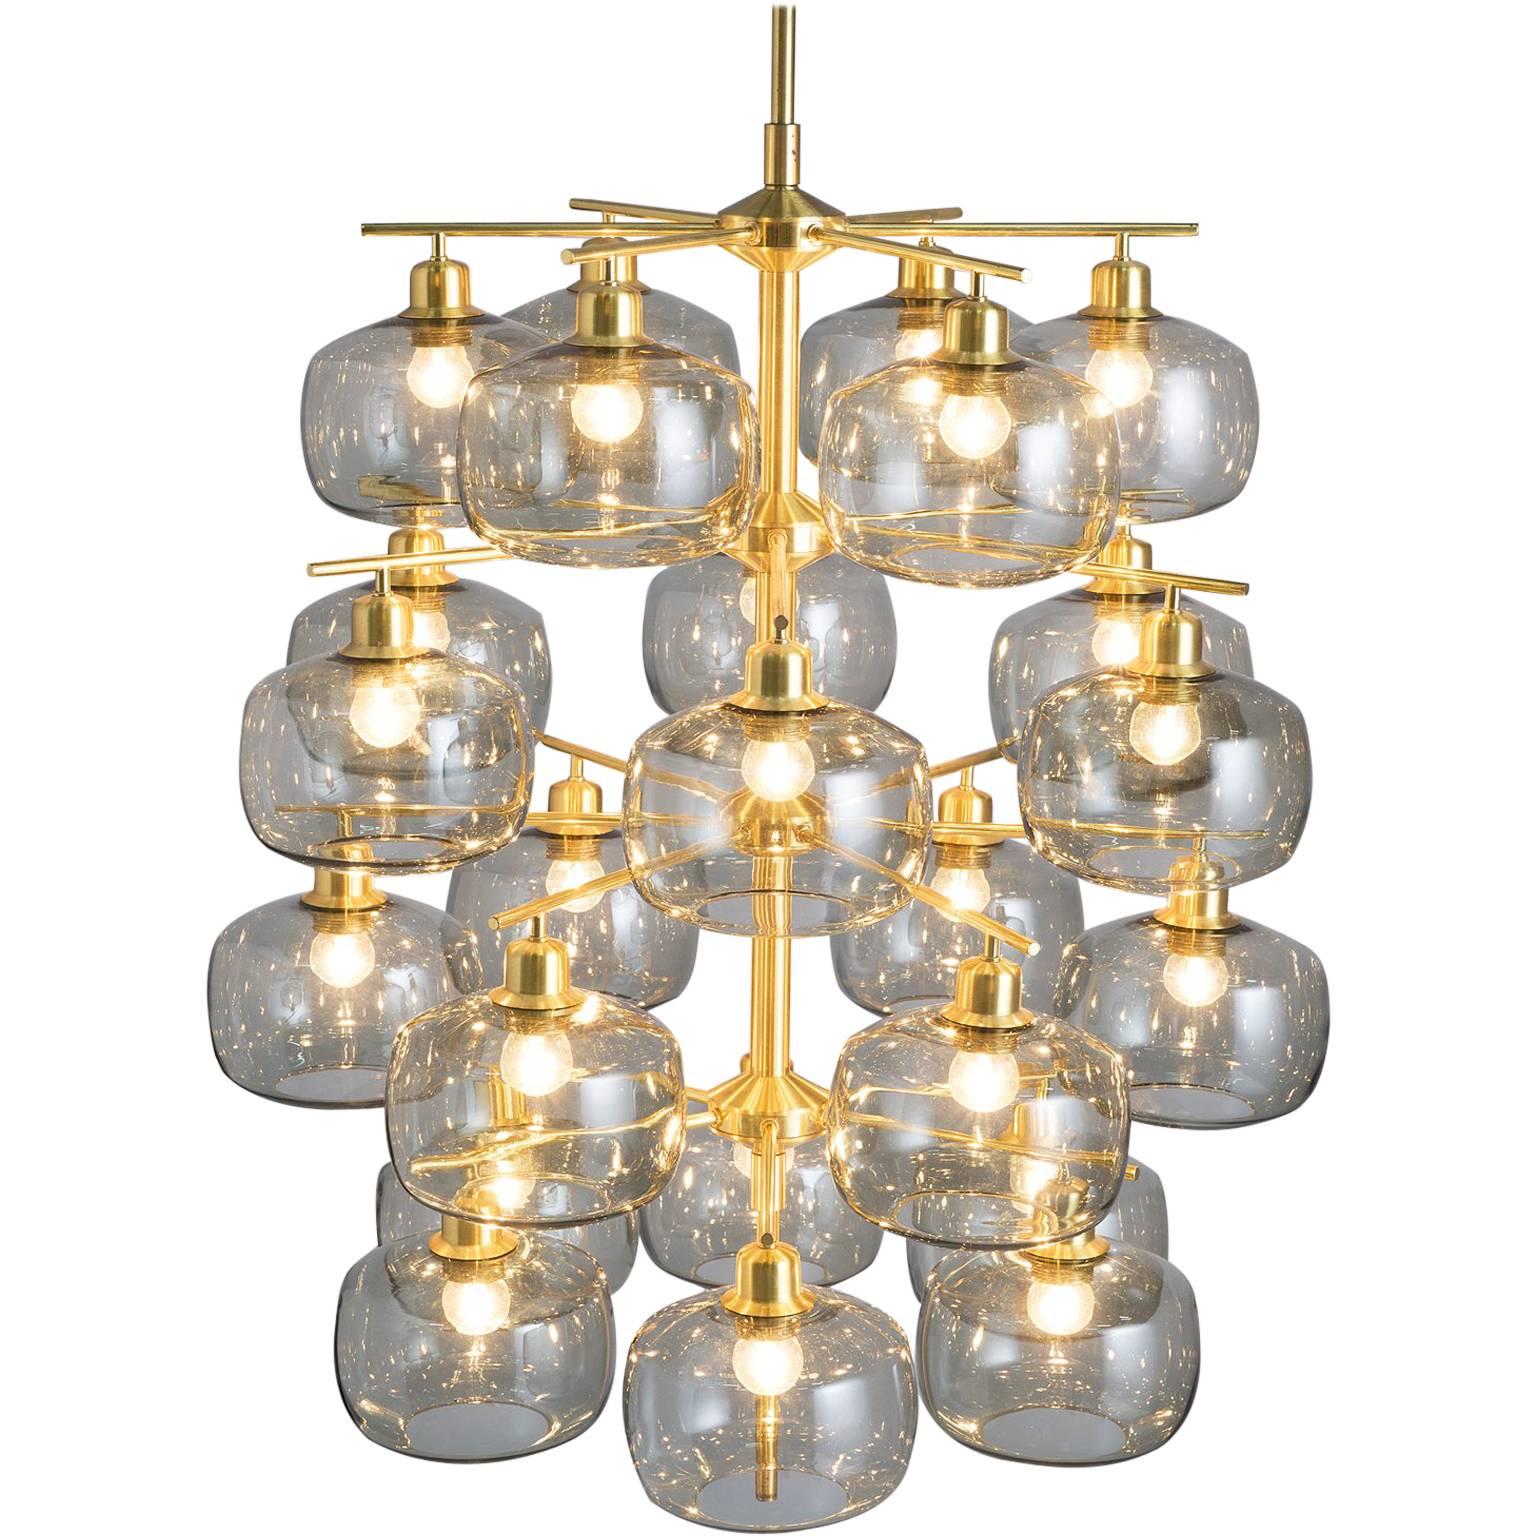 Large Swedish Chandeliers by Holger Johansson, 1952